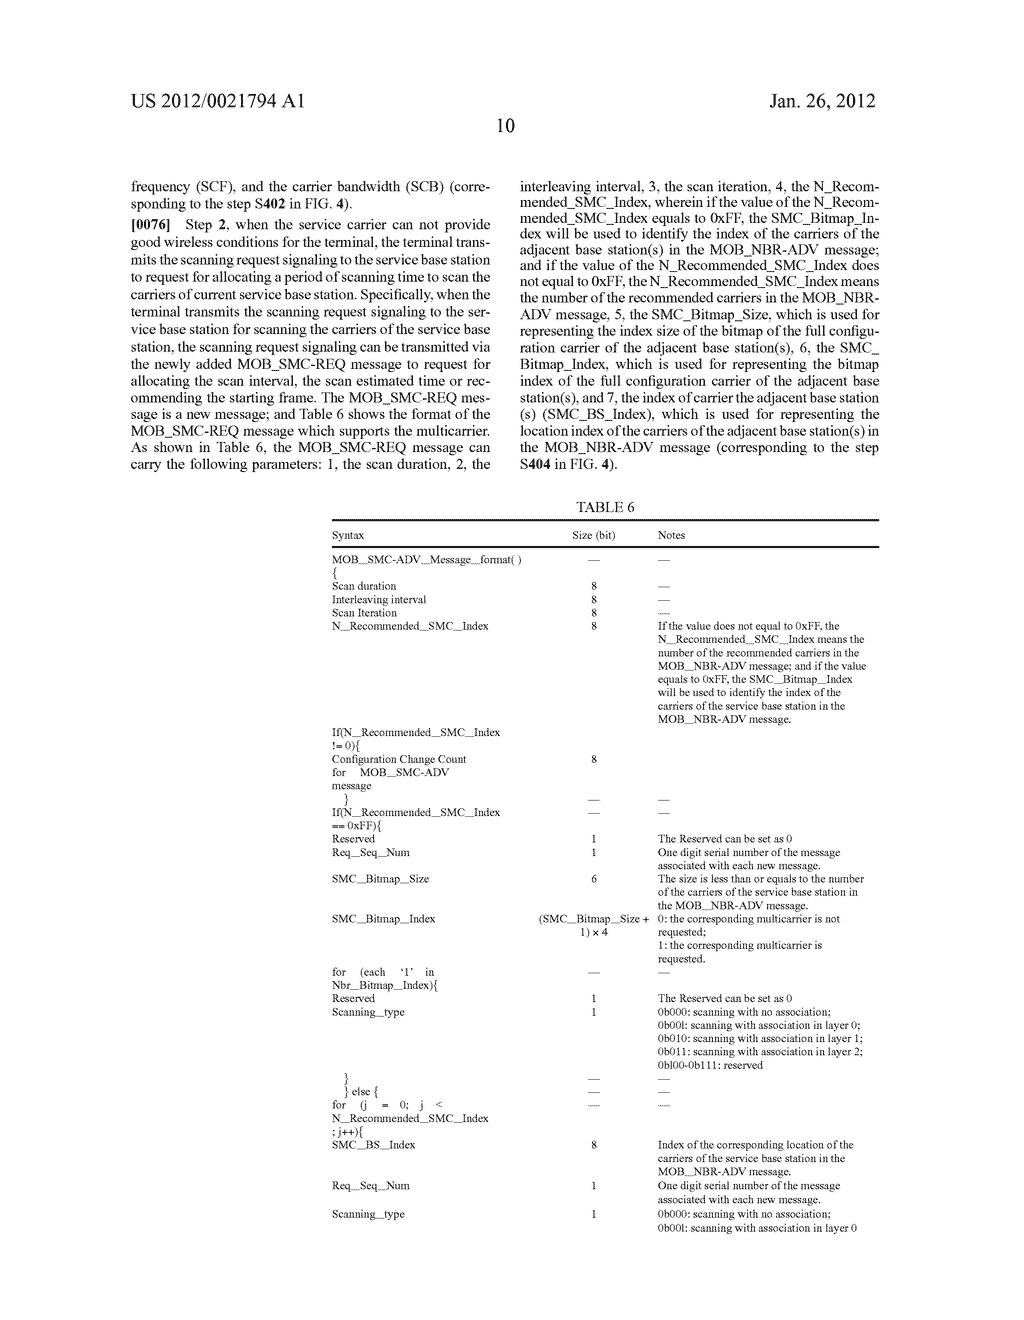 METHODS FOR TRANSMITTING A SCANNING REQUEST BASED ON A MULTICARRIER SYSTEM - diagram, schematic, and image 18